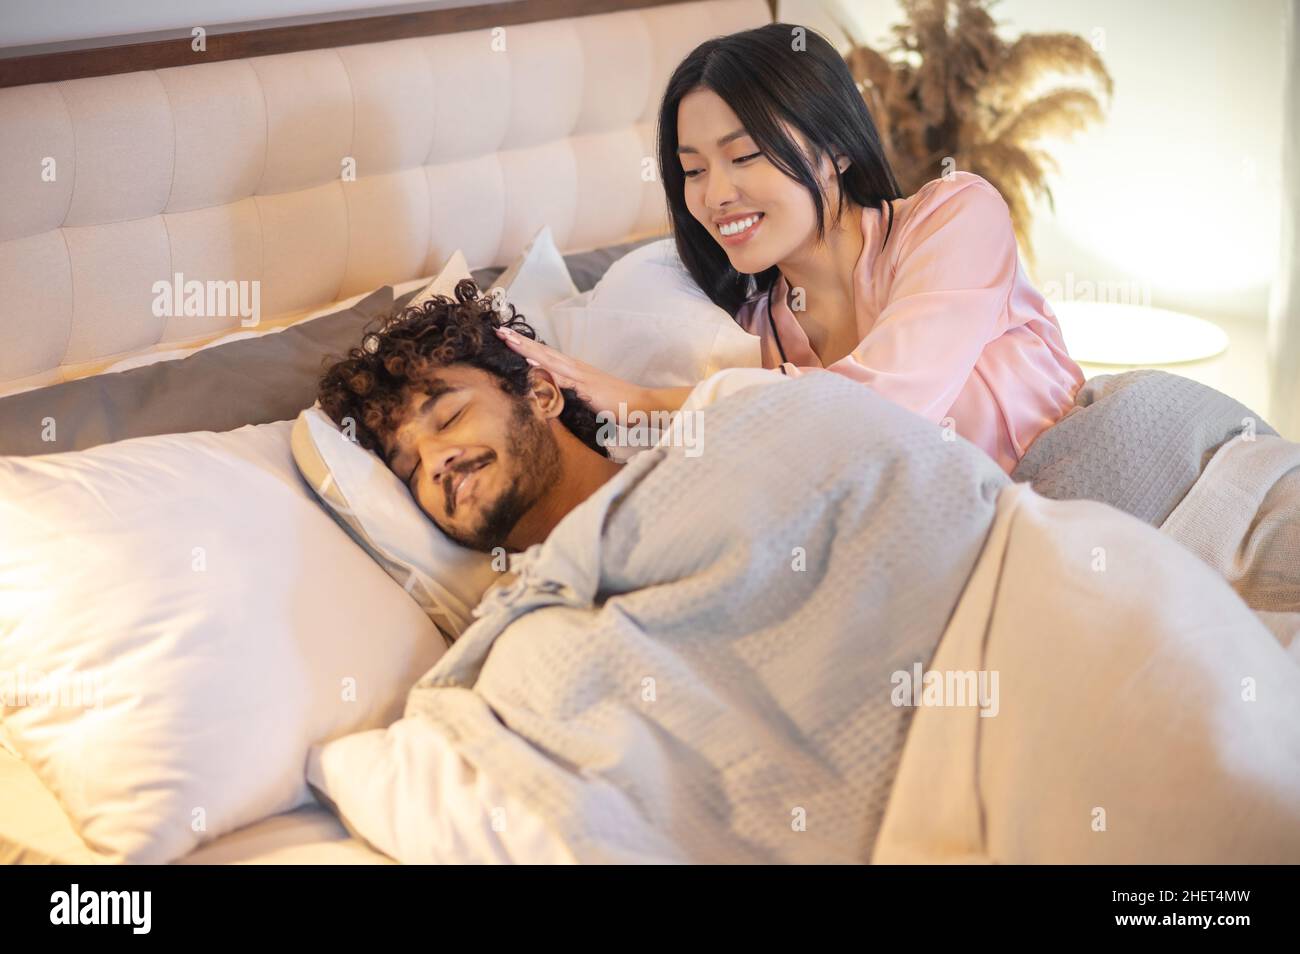 Woman touching mans head with closed eyes in bed Stock Photo